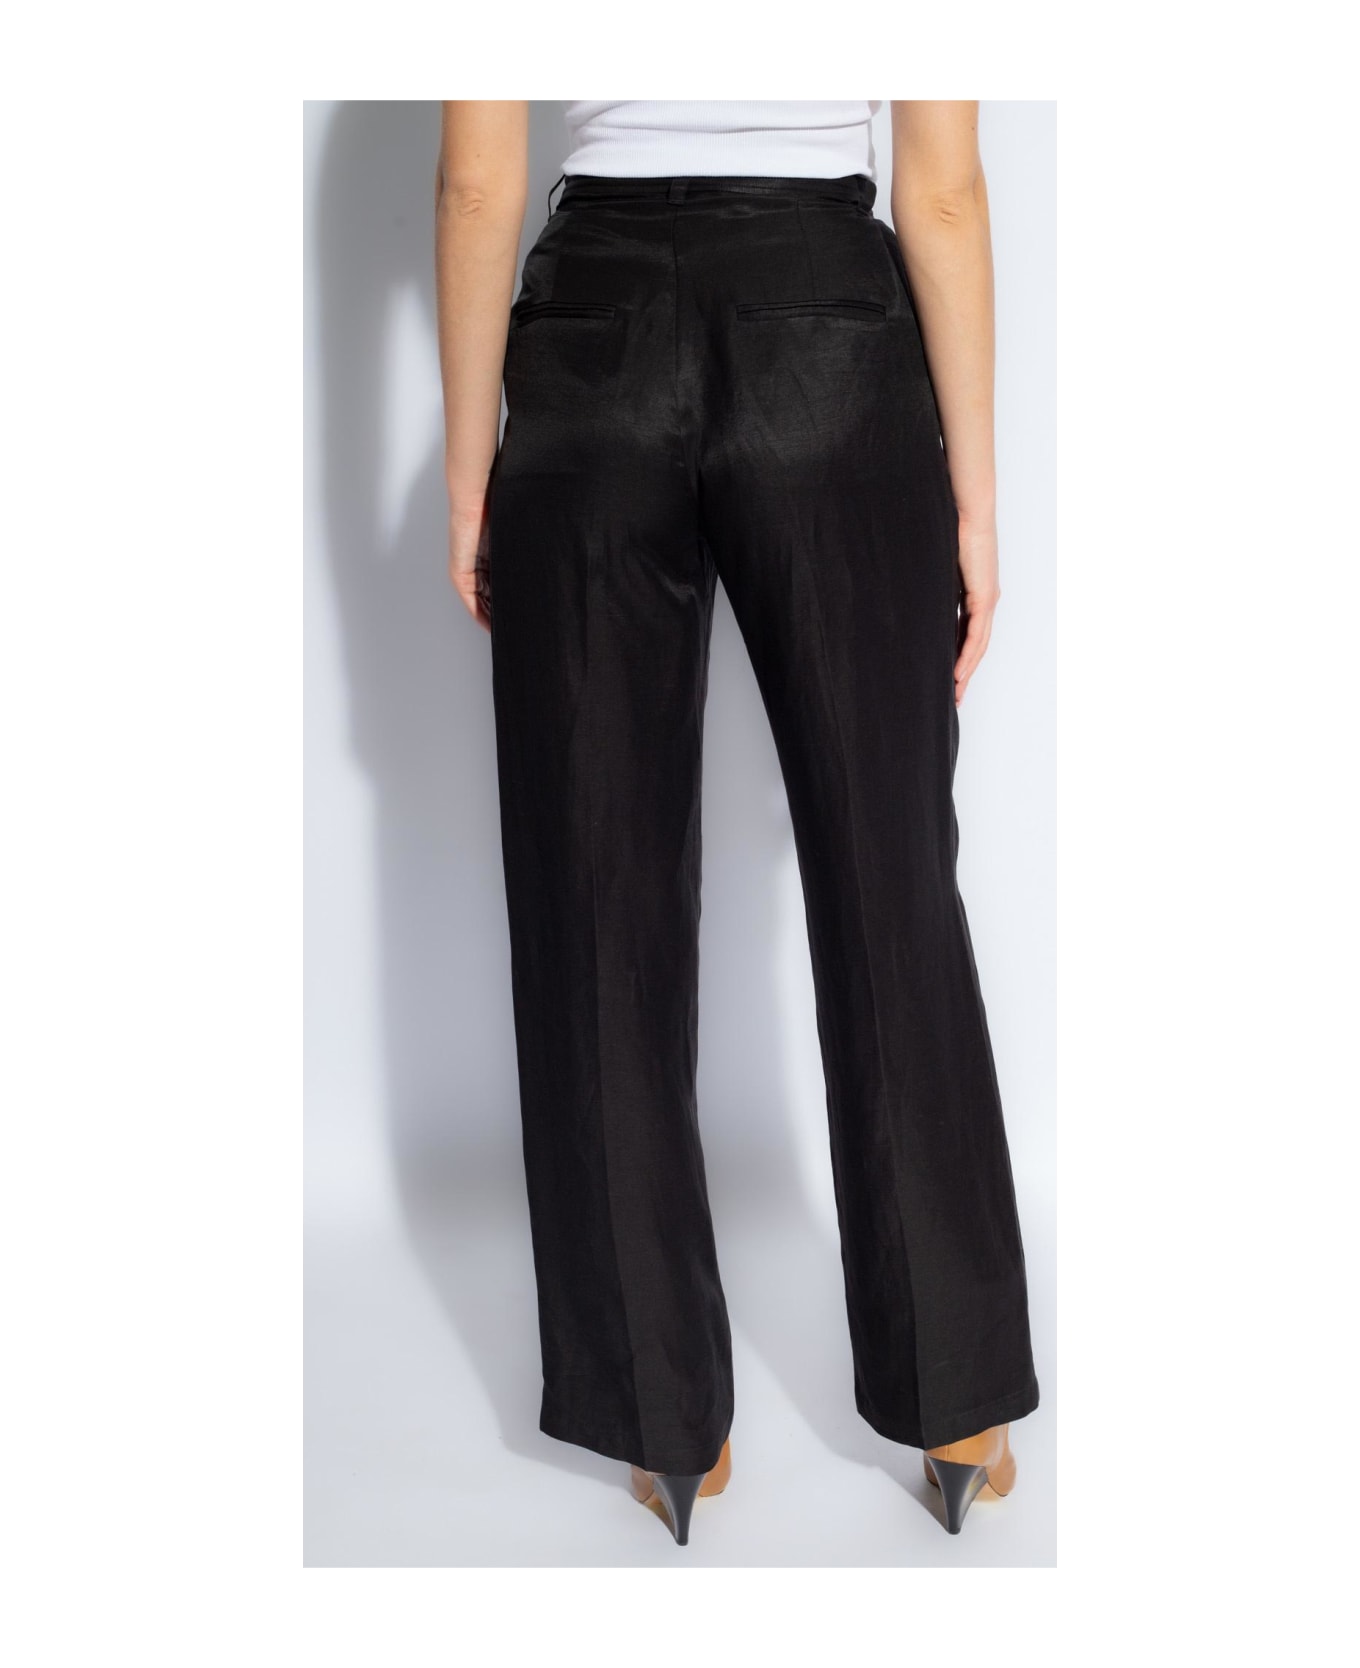 Anine Bing 'carrie' High-waisted Trousers - Black ボトムス